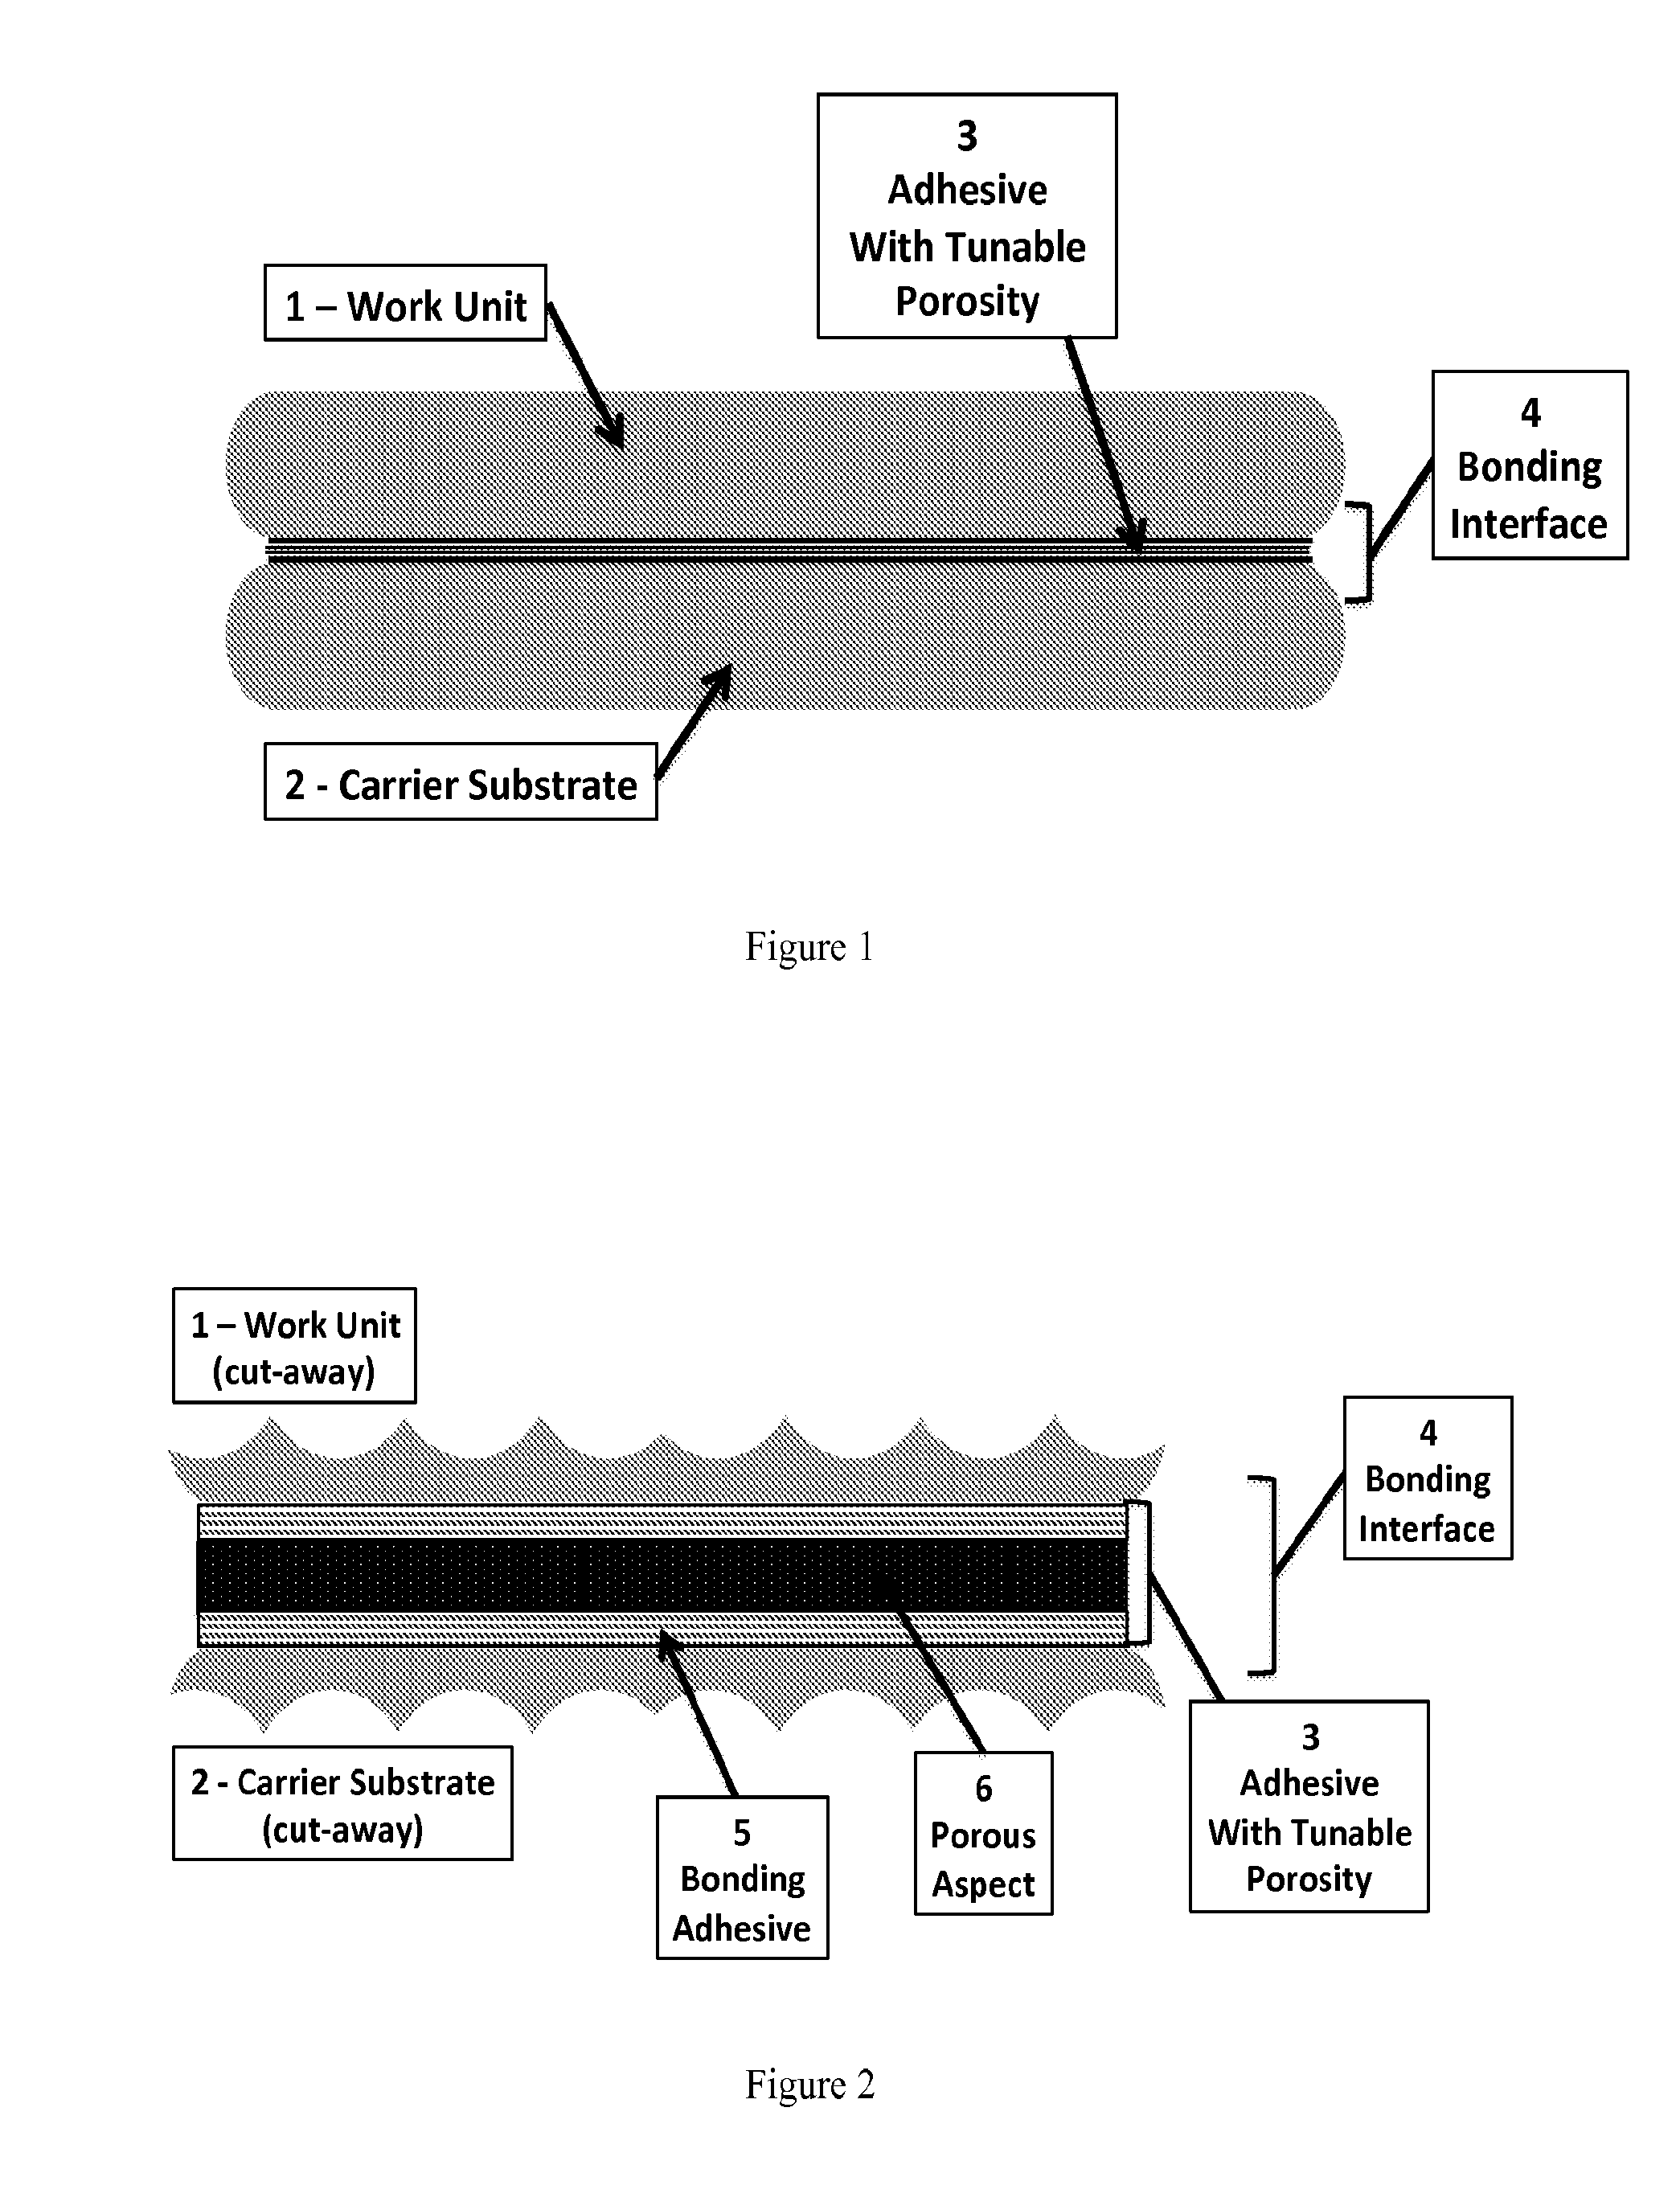 Adhesive with tunable porosity and methods to support temporary bonding applications